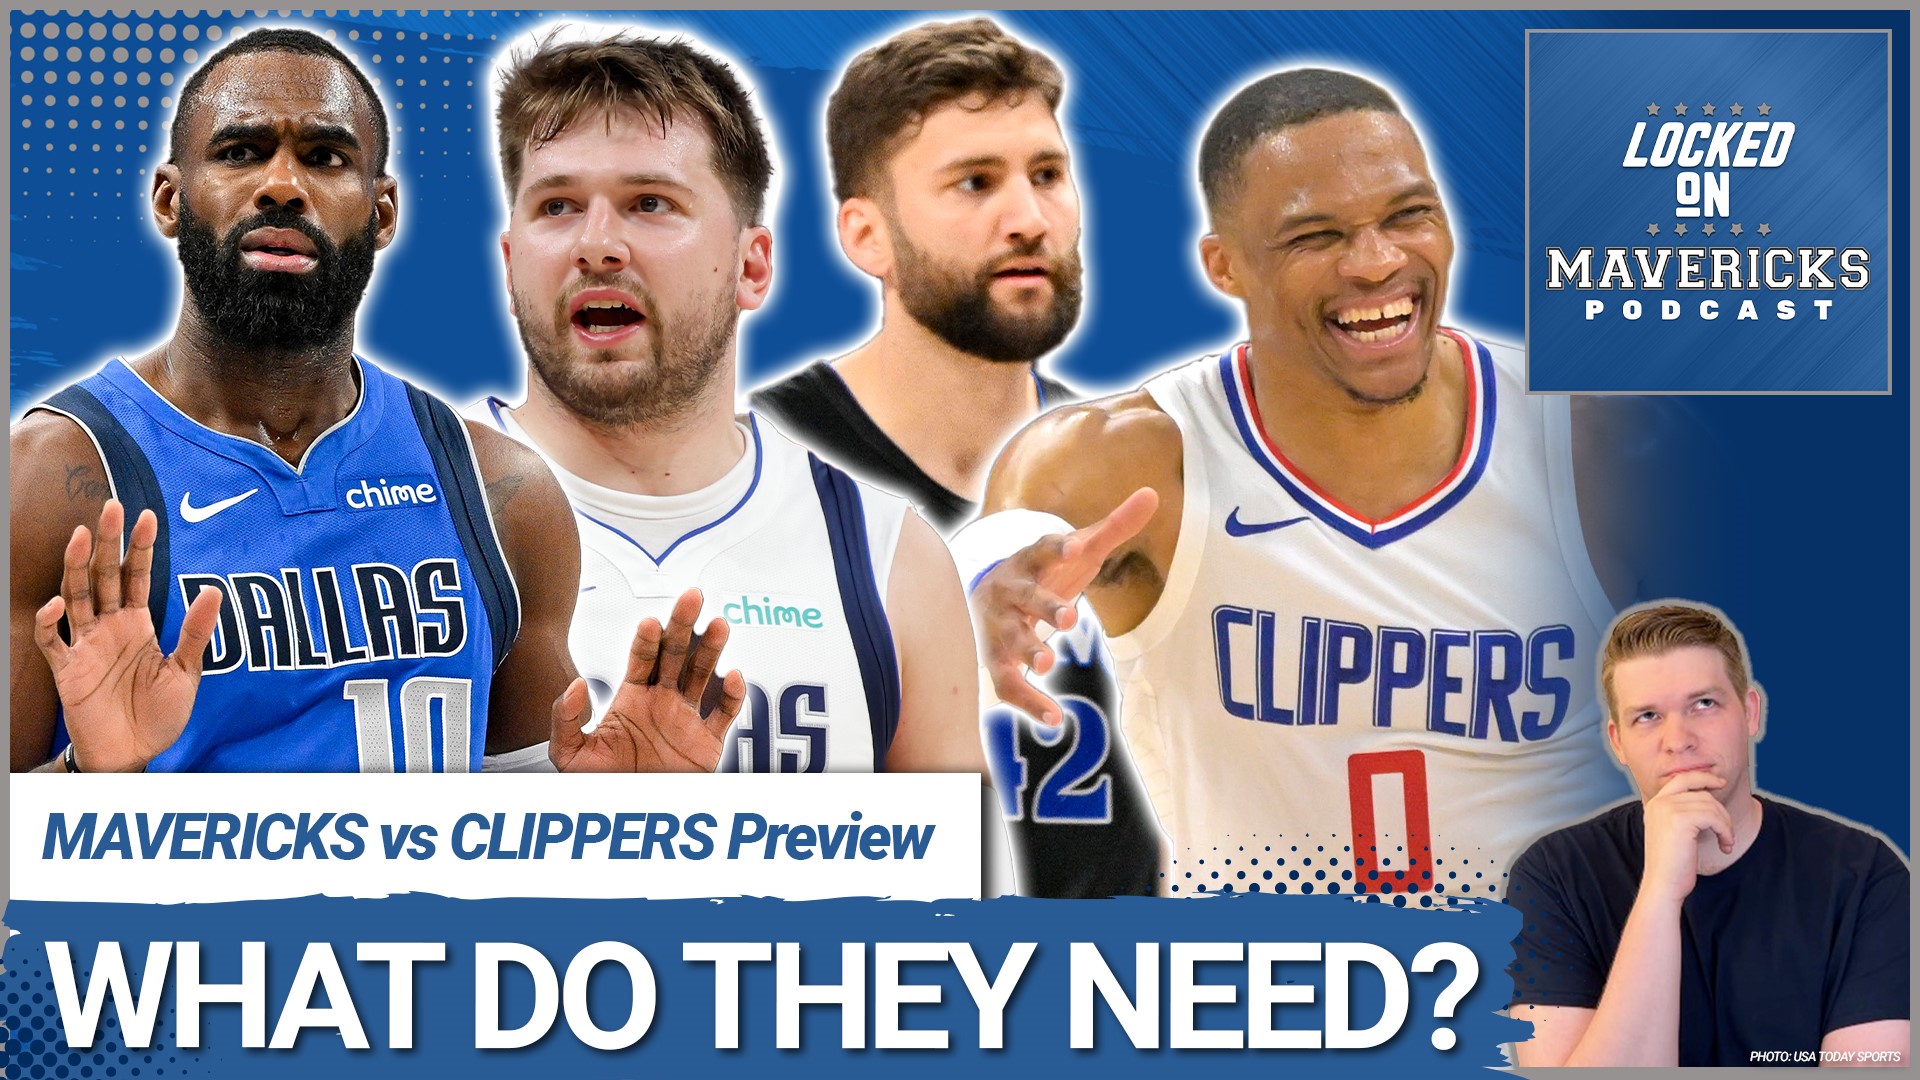 Nick Angstadt shares his biggest questions about the Dallas Mavericks vs Los Angeles Clippers Playoff Series, if the Mavs need a 3rd scorer to step up, and more.